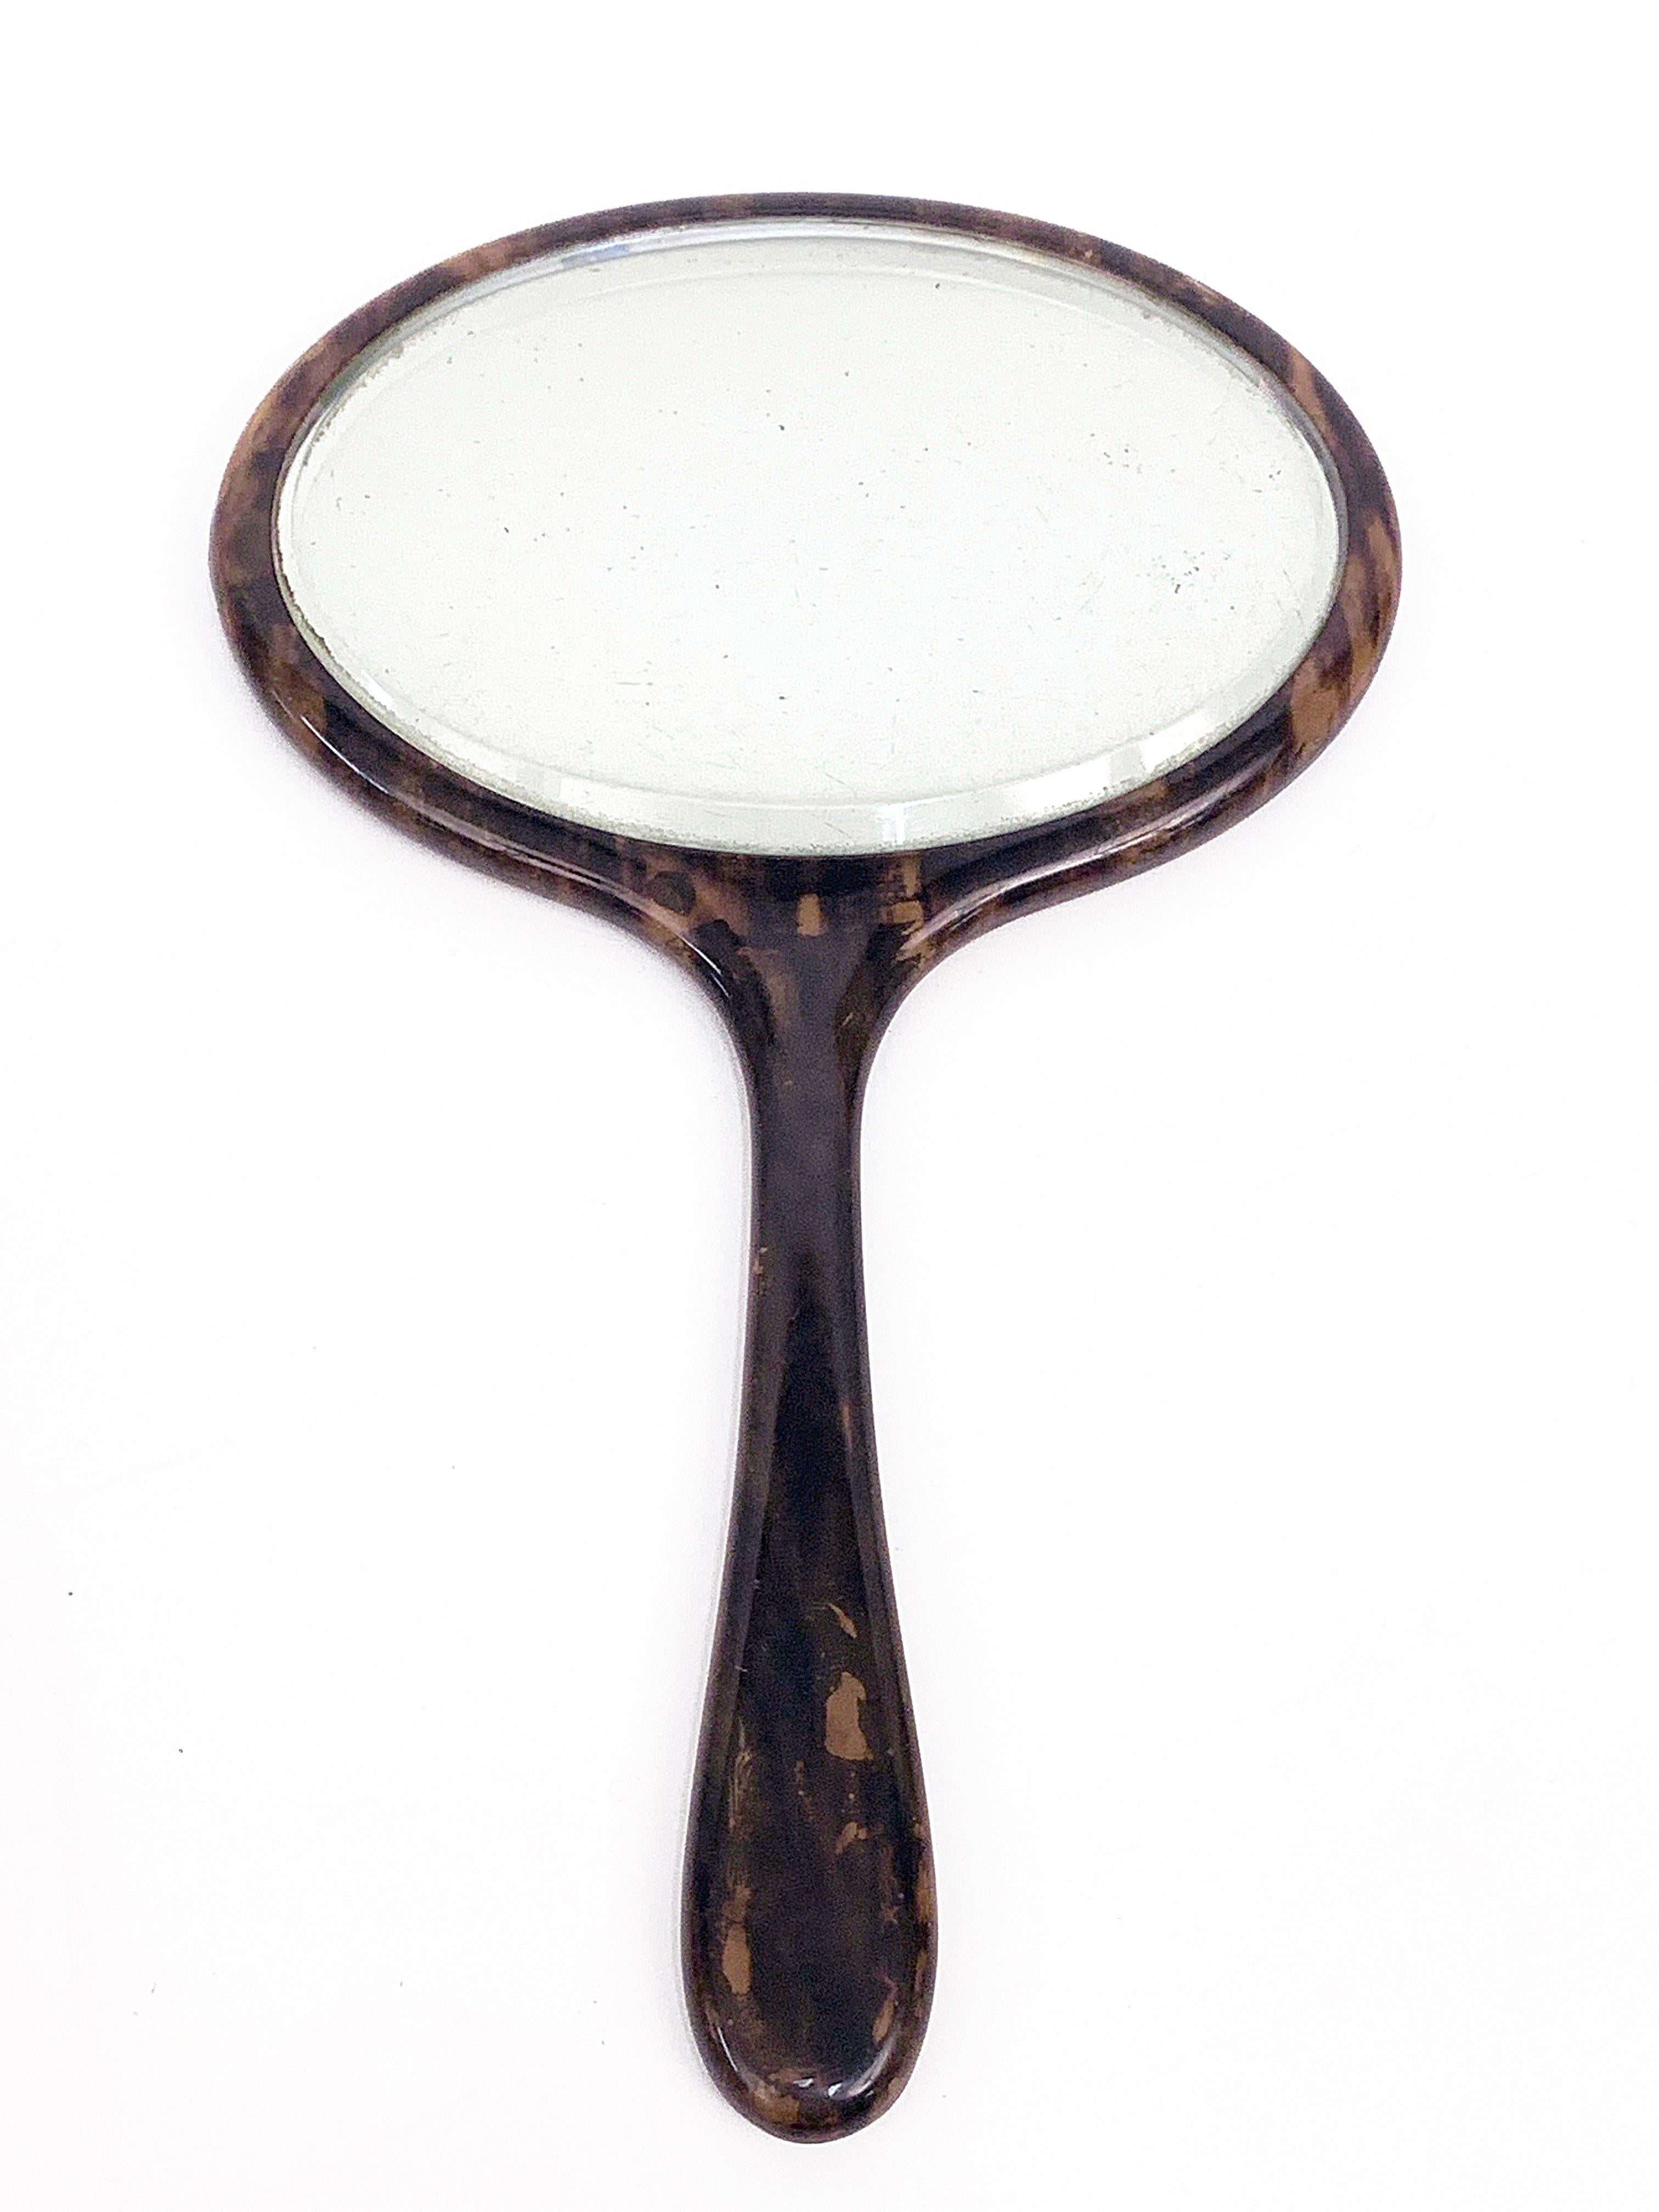 Midcentury English Oval Faux Tortoiseshell Portable Mirror, 1950s In Good Condition For Sale In Roma, IT